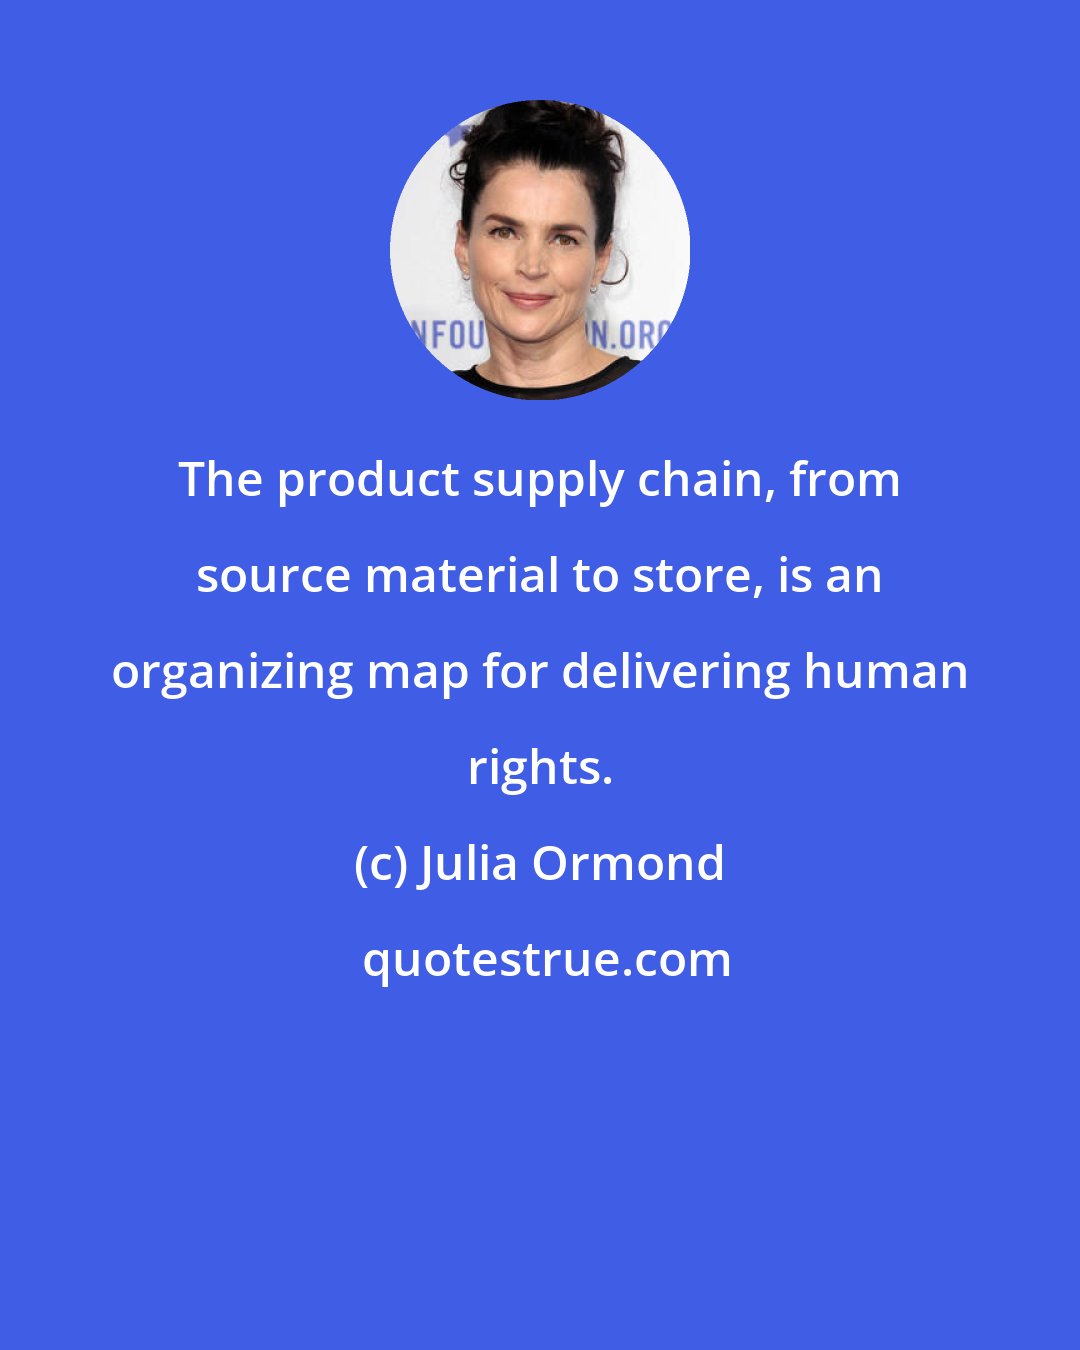 Julia Ormond: The product supply chain, from source material to store, is an organizing map for delivering human rights.